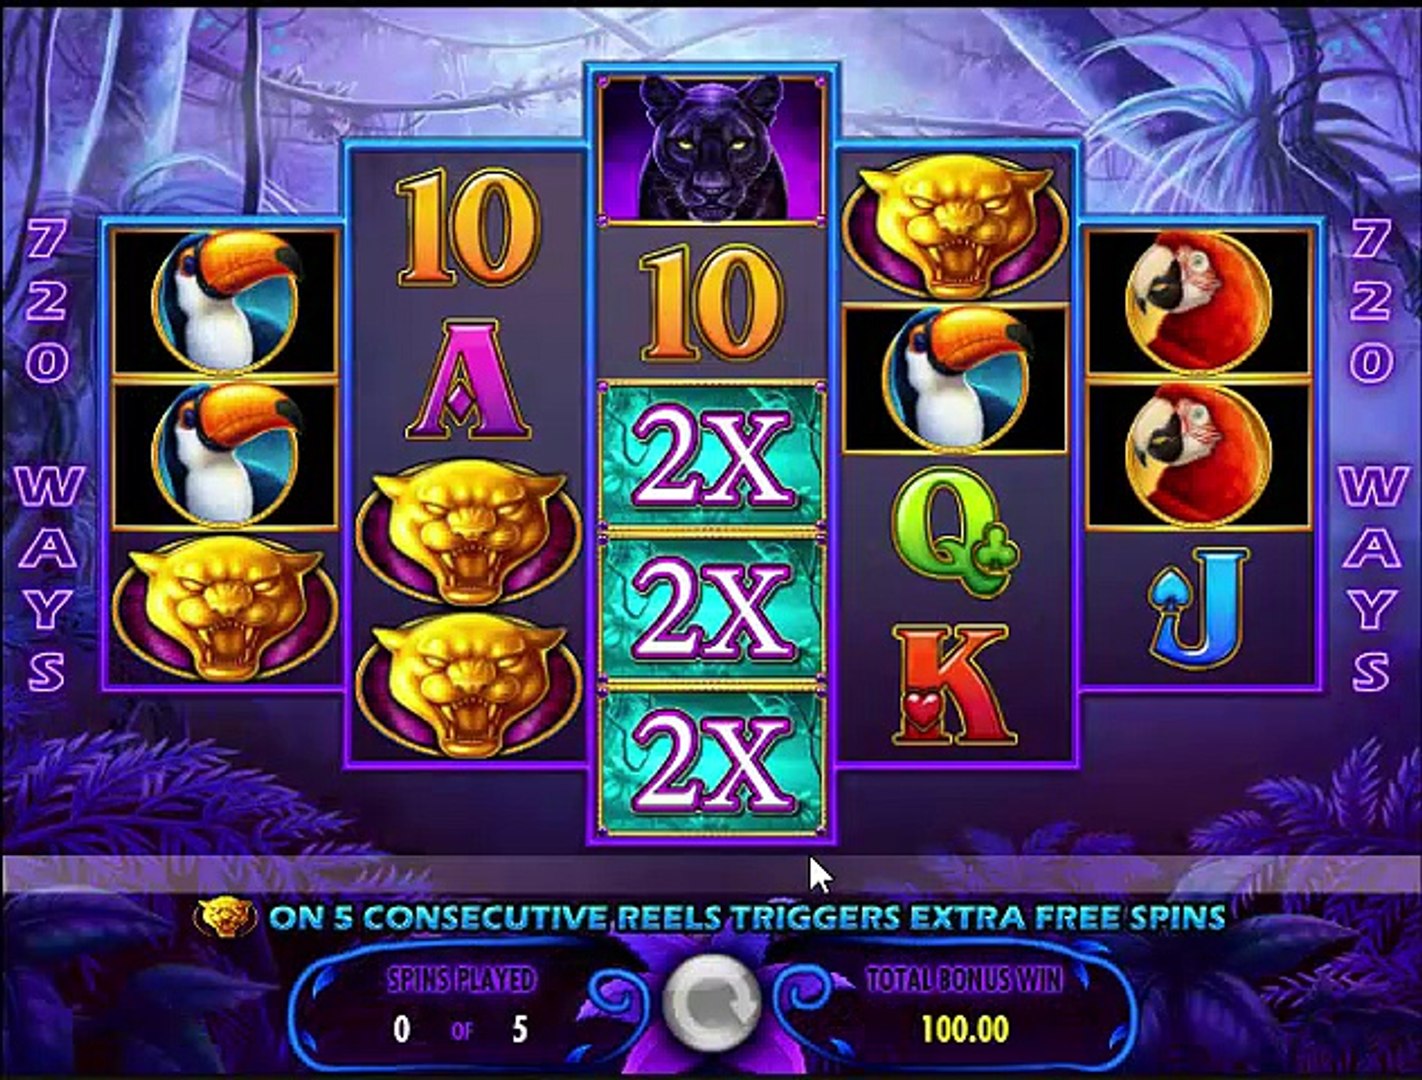 Crazy Luck Casino Instant Play